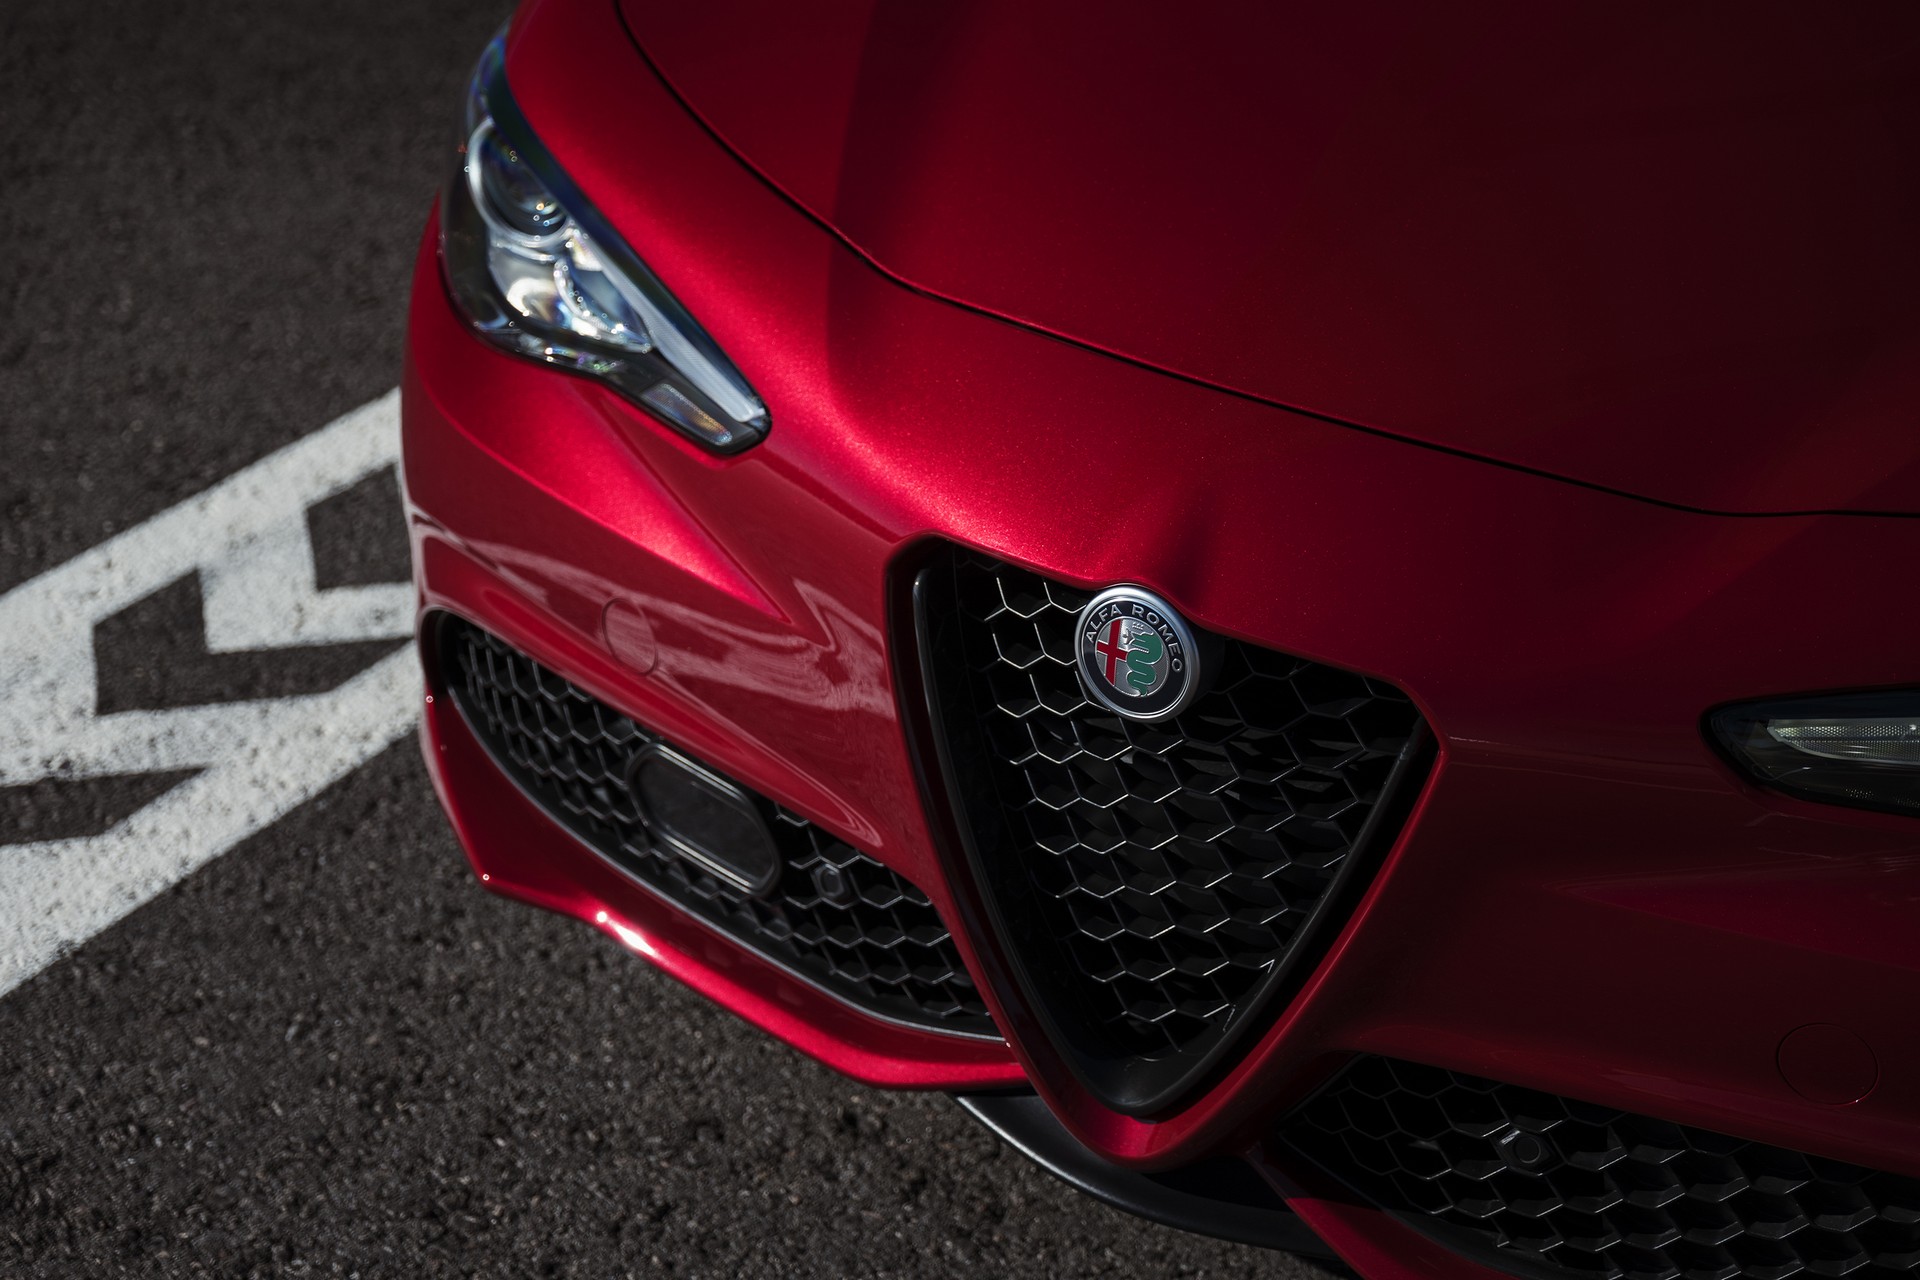 2019 Alfa Romeo Giulia Gains New Styling Packages, Additional Equipment ...